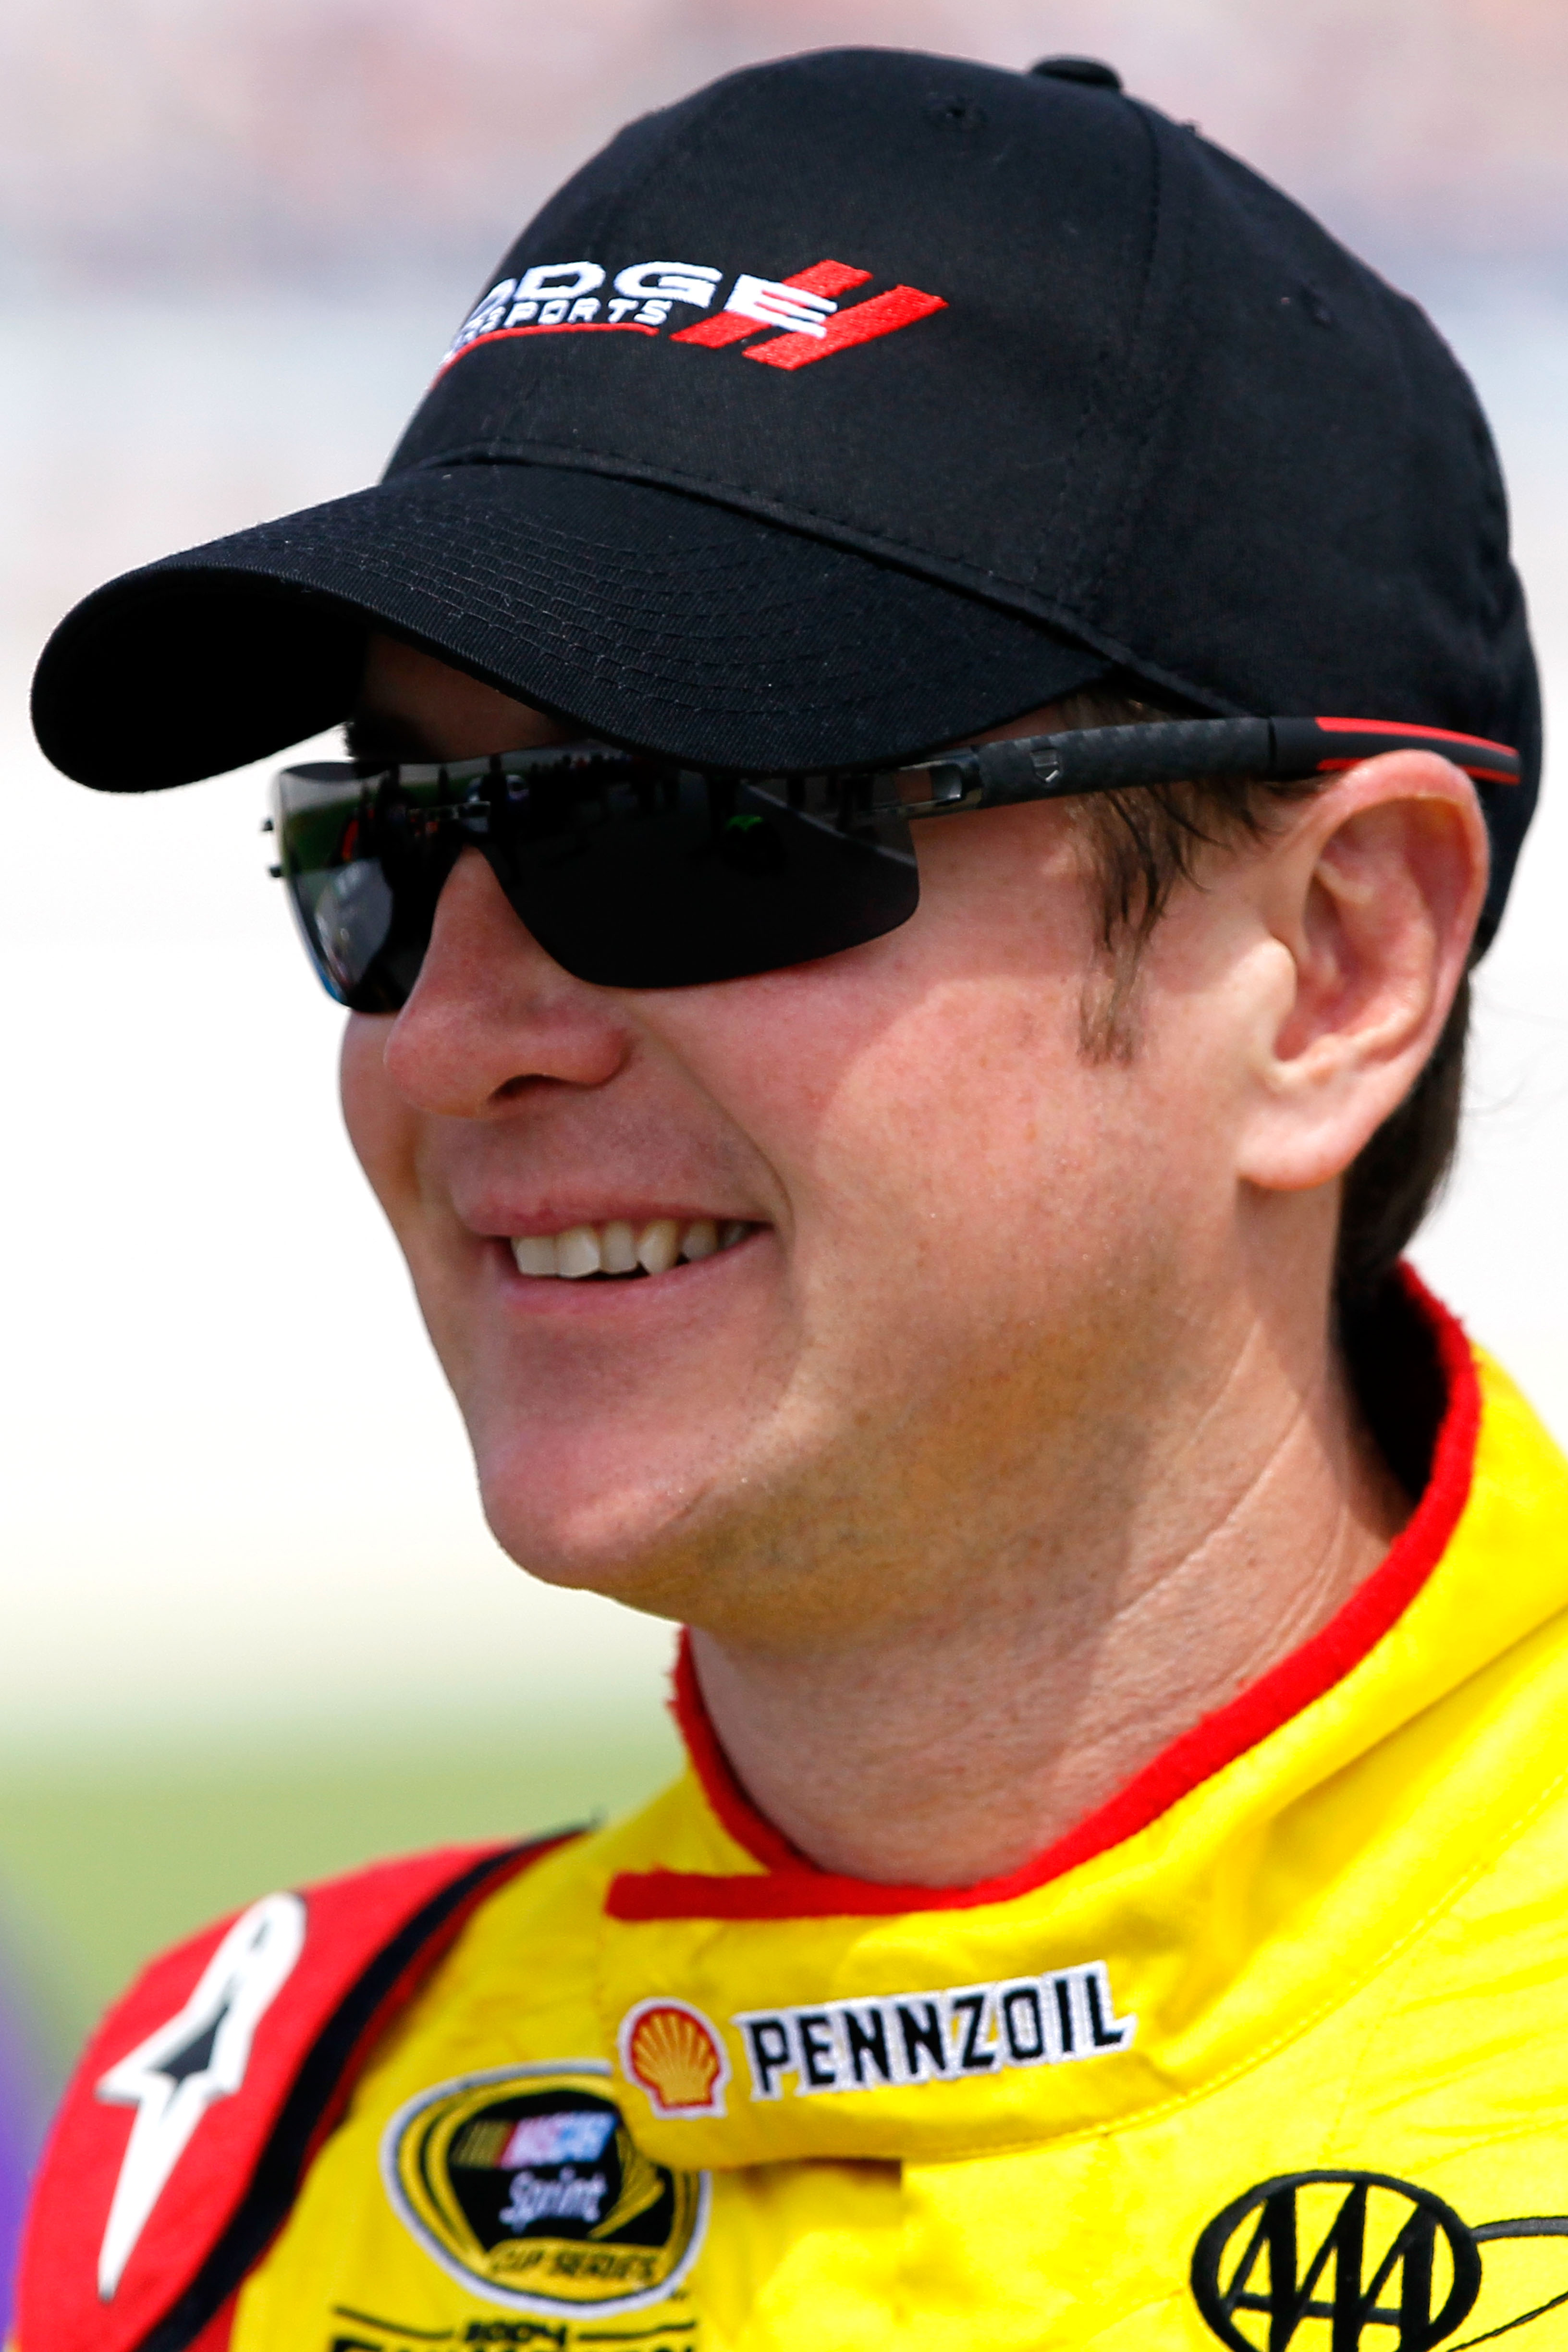 TALLADEGA, AL - APRIL 16:  Kurt Busch, driver of the #22 Shell/Pennzoil-AAA Dodge, walks on the grid during qualifying for the NASCAR Sprint Cup Series Aaron's 499 at Talladega Superspeedway on April 16, 2011 in Talladega, Alabama.  (Photo by Kevin C. Cox